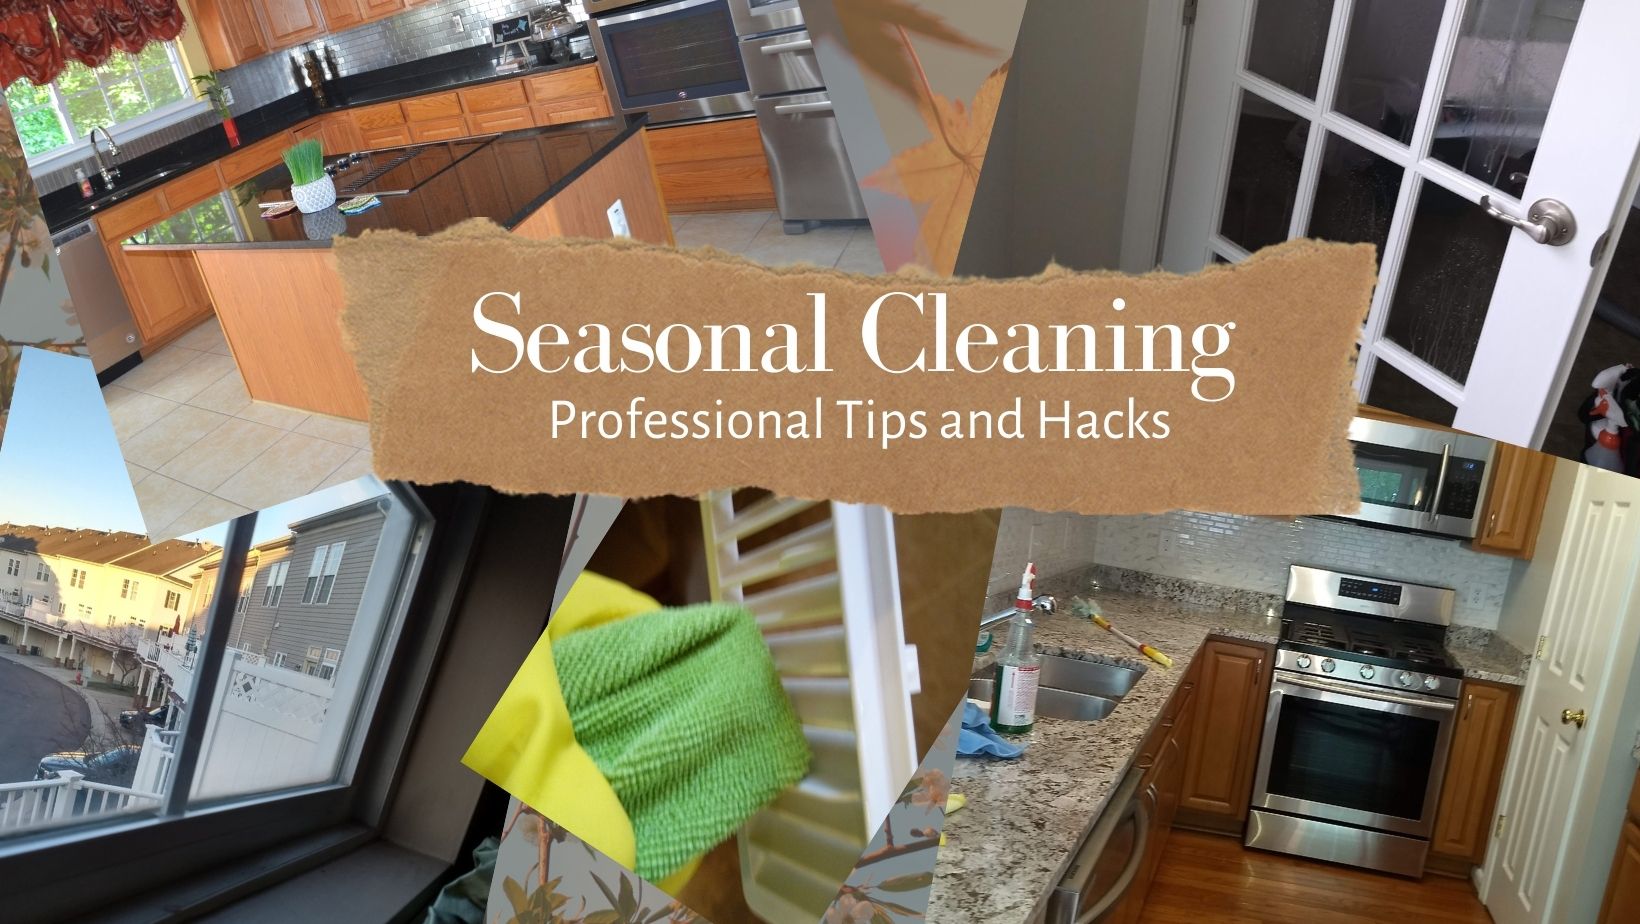 Professional Cleaning Tips and Hacks